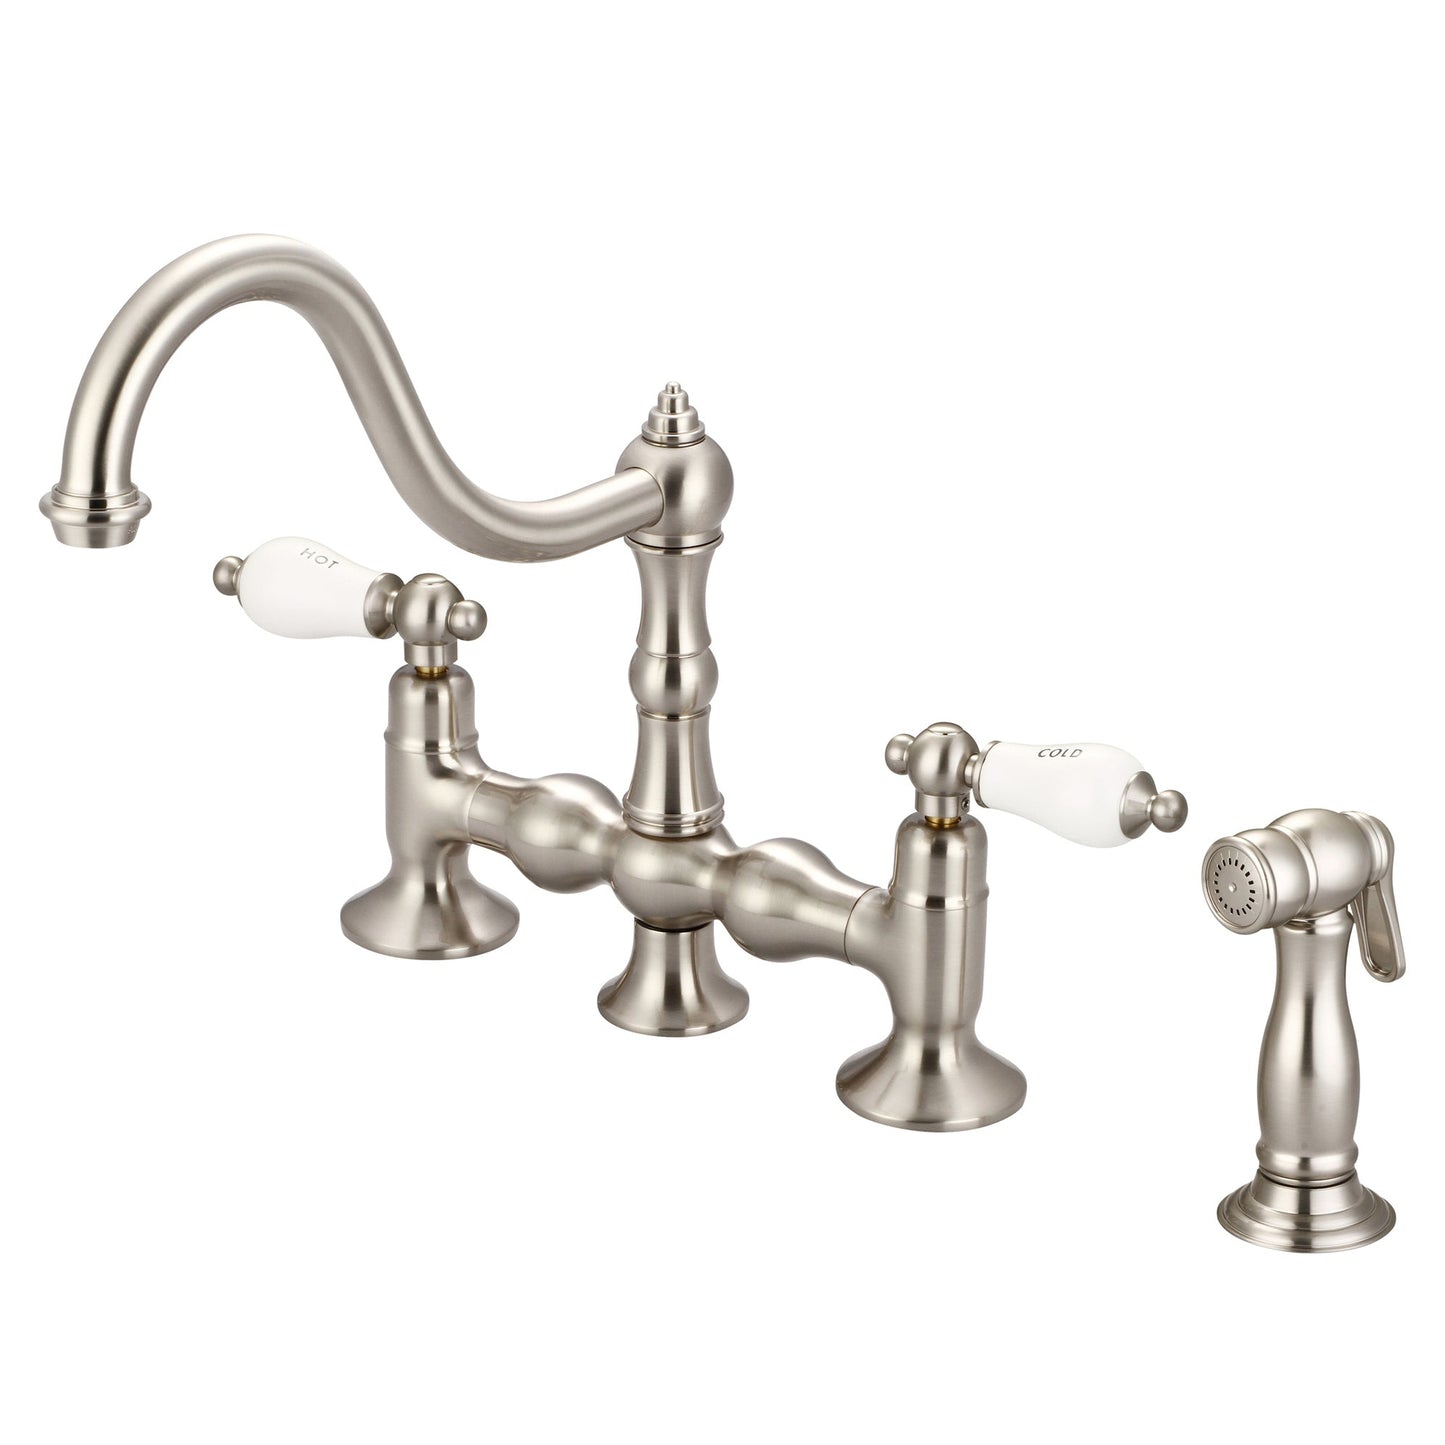 Water Creation Bridge Style Kitchen F5-0010 8" Grey Solid Brass Faucet With Side Spray And Porcelain Lever Handles, Hot And Cold Labels Included